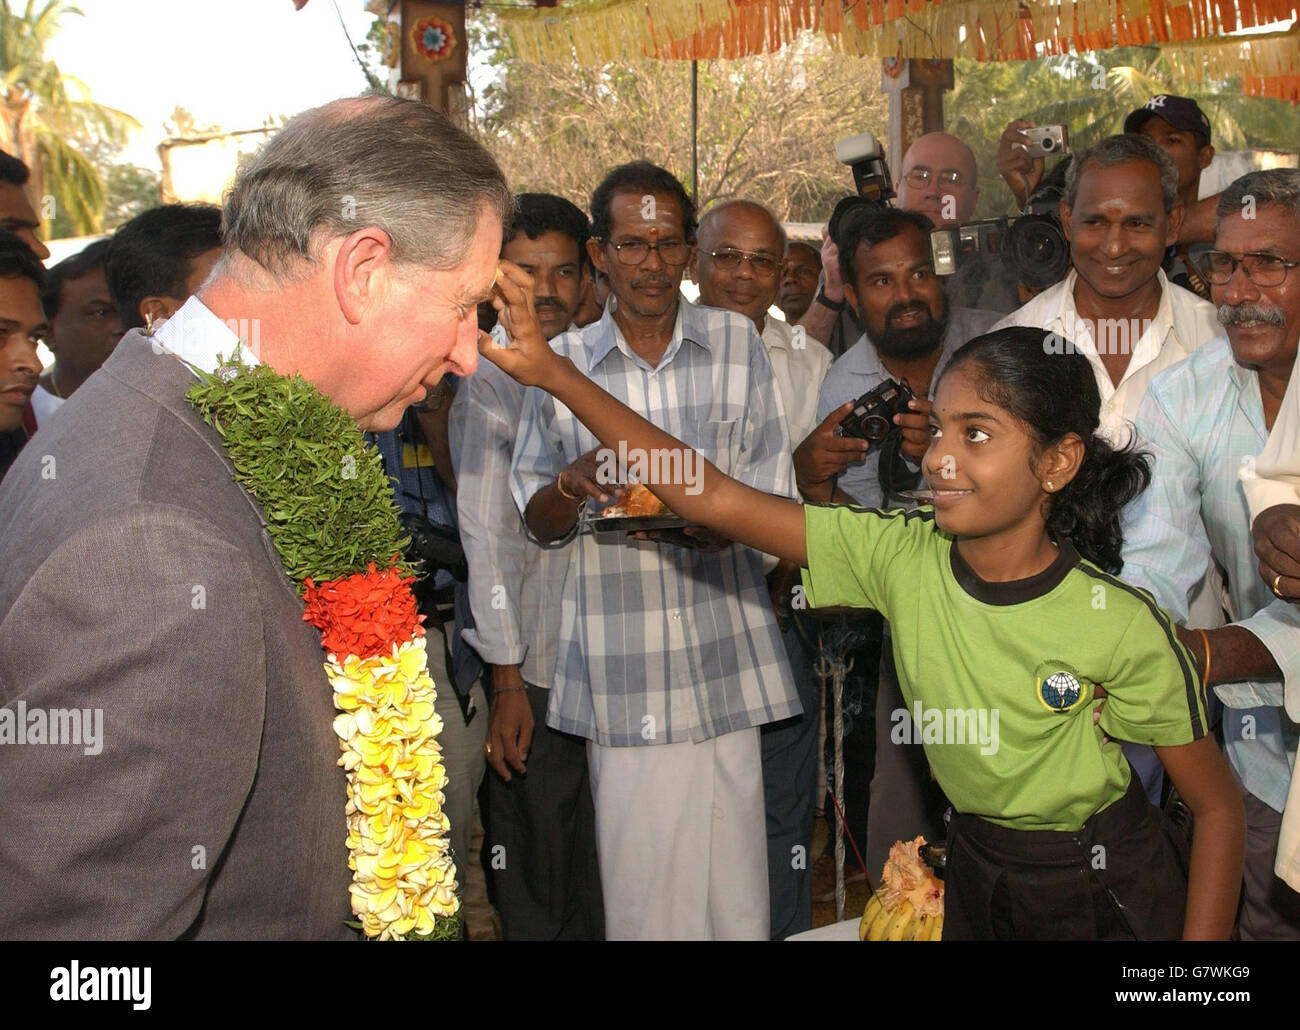 The Prince of Wales is marked with paint on his forehead as a sign of good luck, after he visited a Hindu temple in the village of Navallady which was devastated by the tsunami which hit the region. Stock Photo